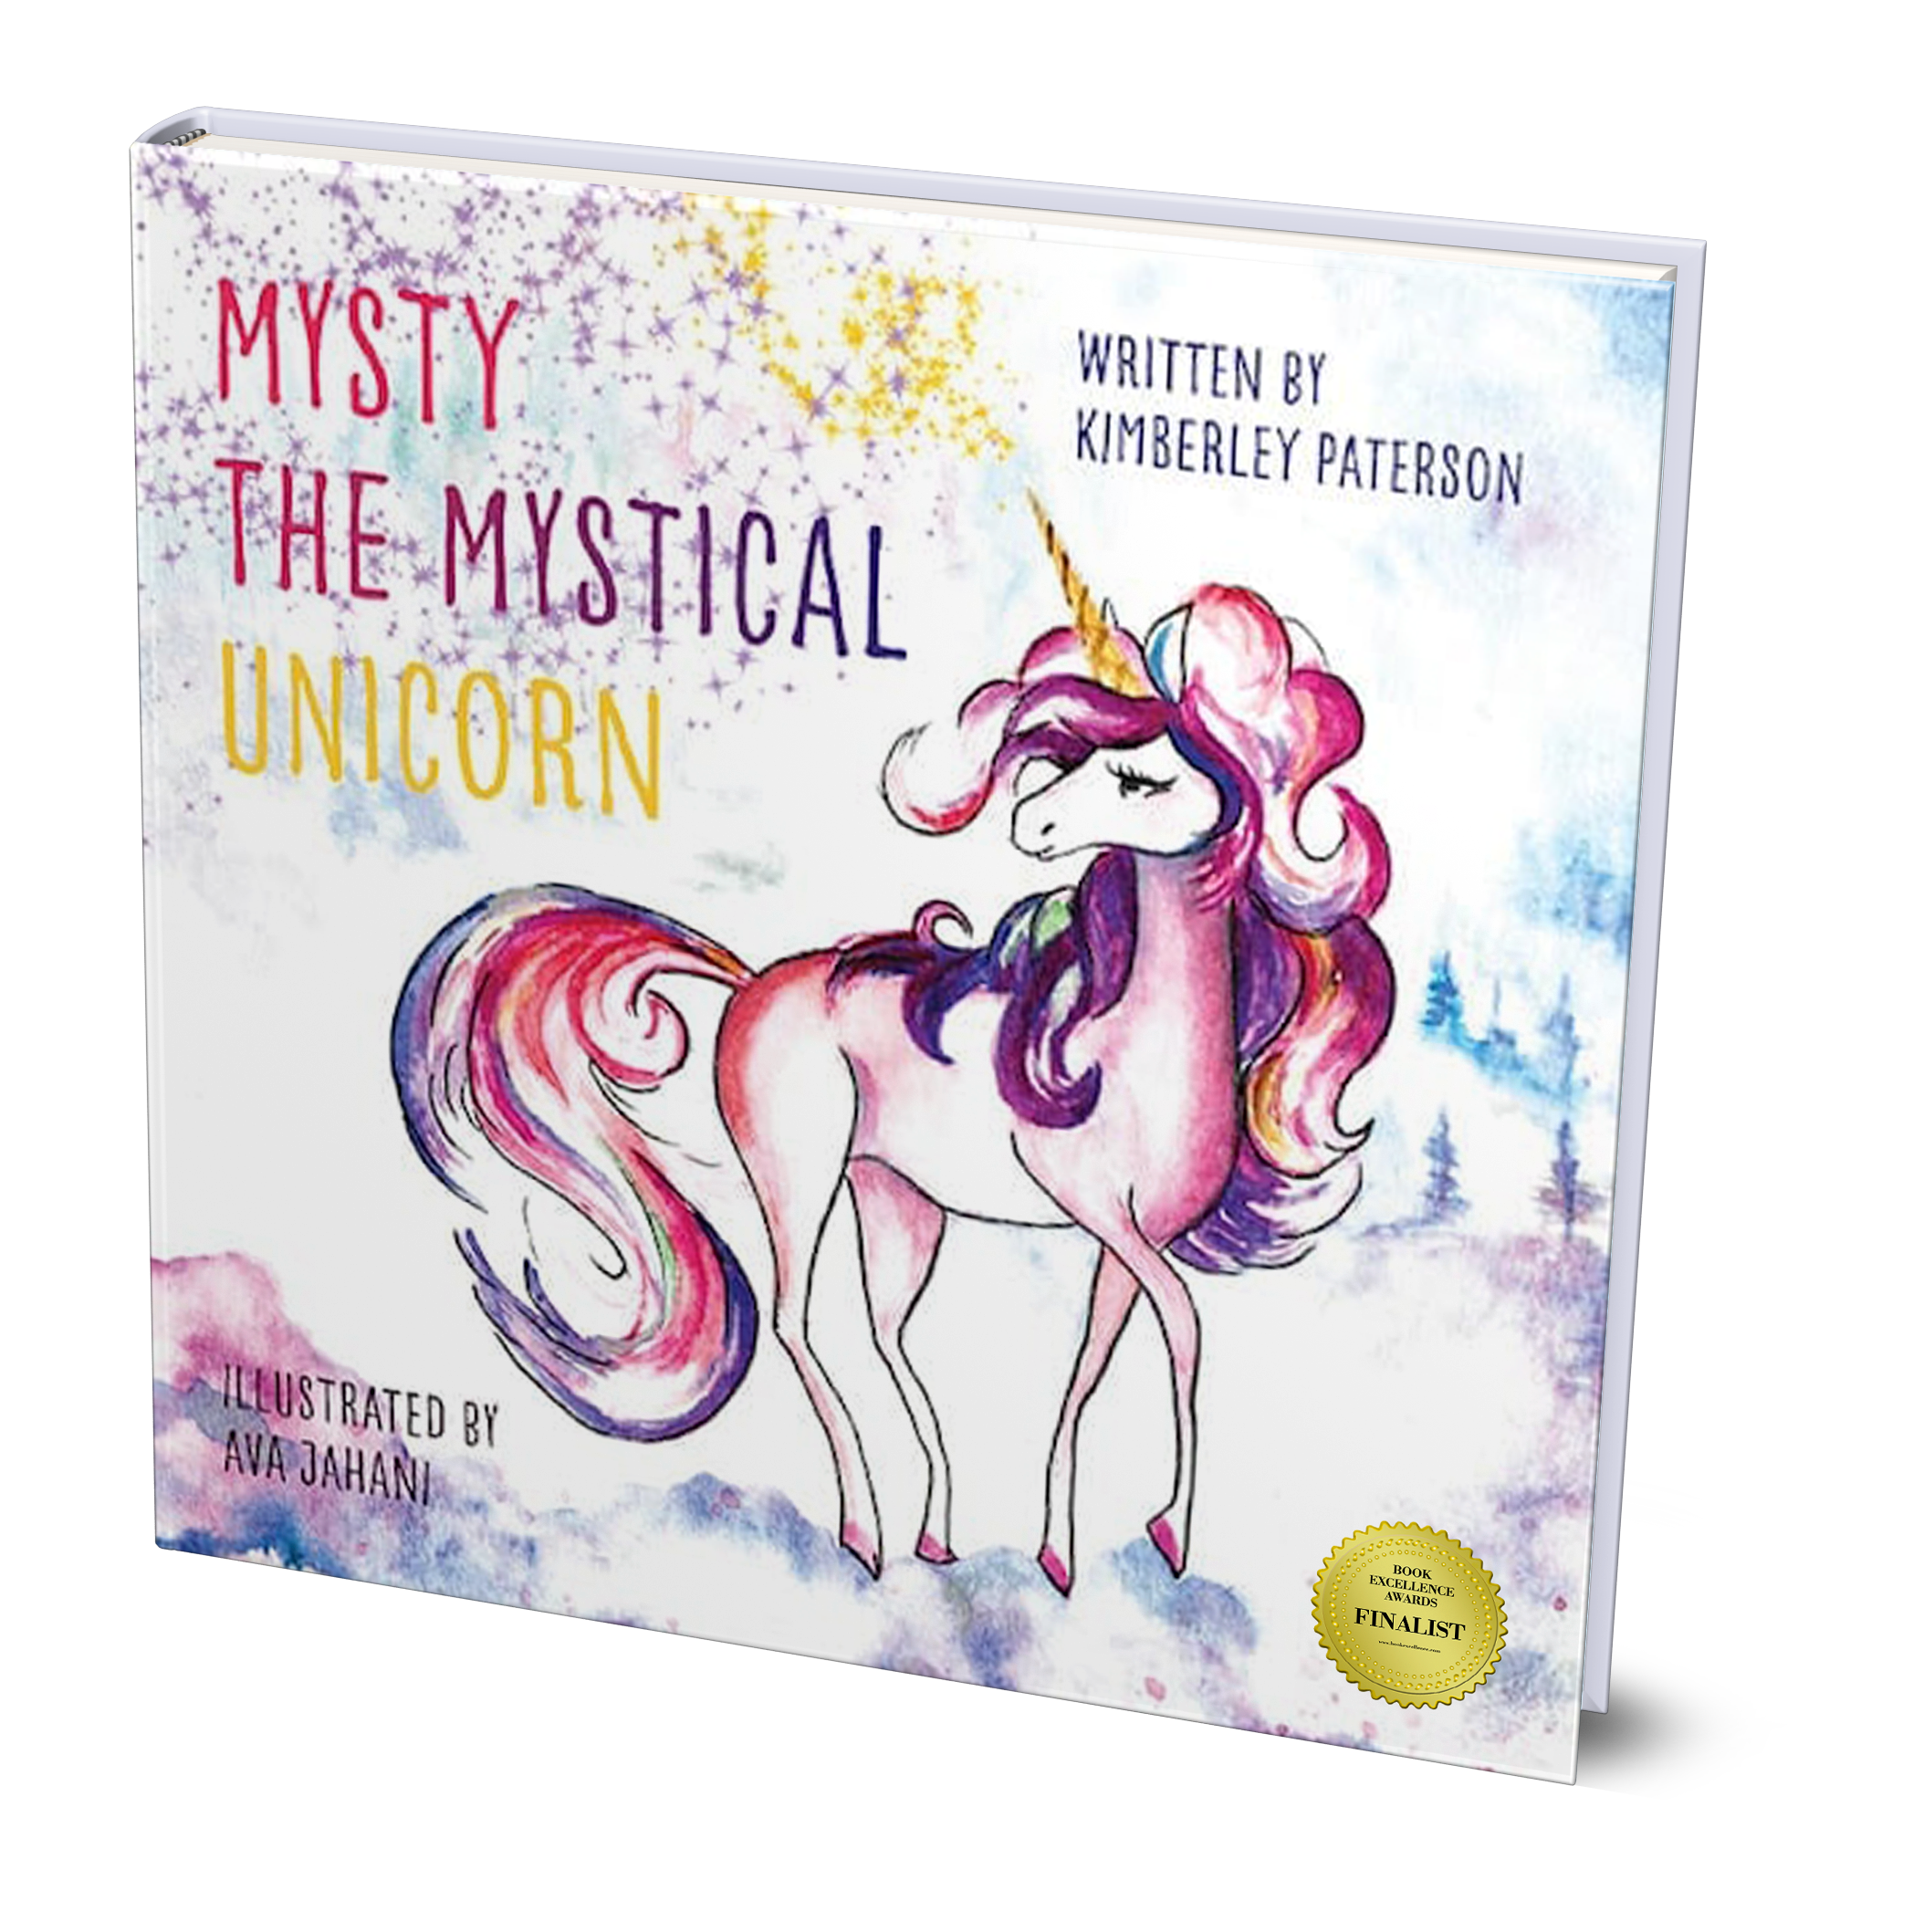 Mysty the Mystical Unicorn is Named a Finalist in 2022 Top Book Award